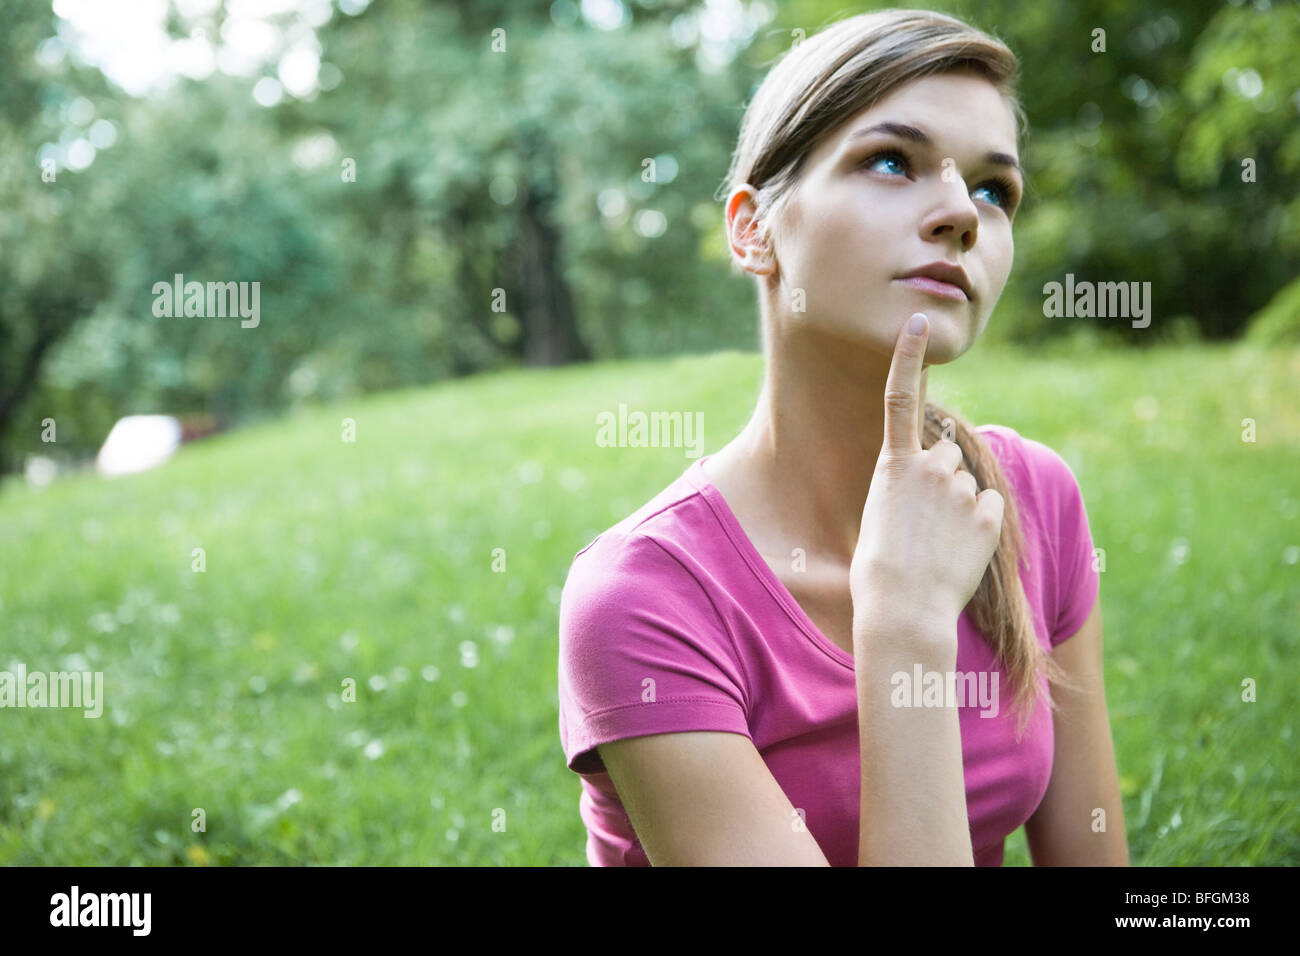 young woman thinking Stock Photo